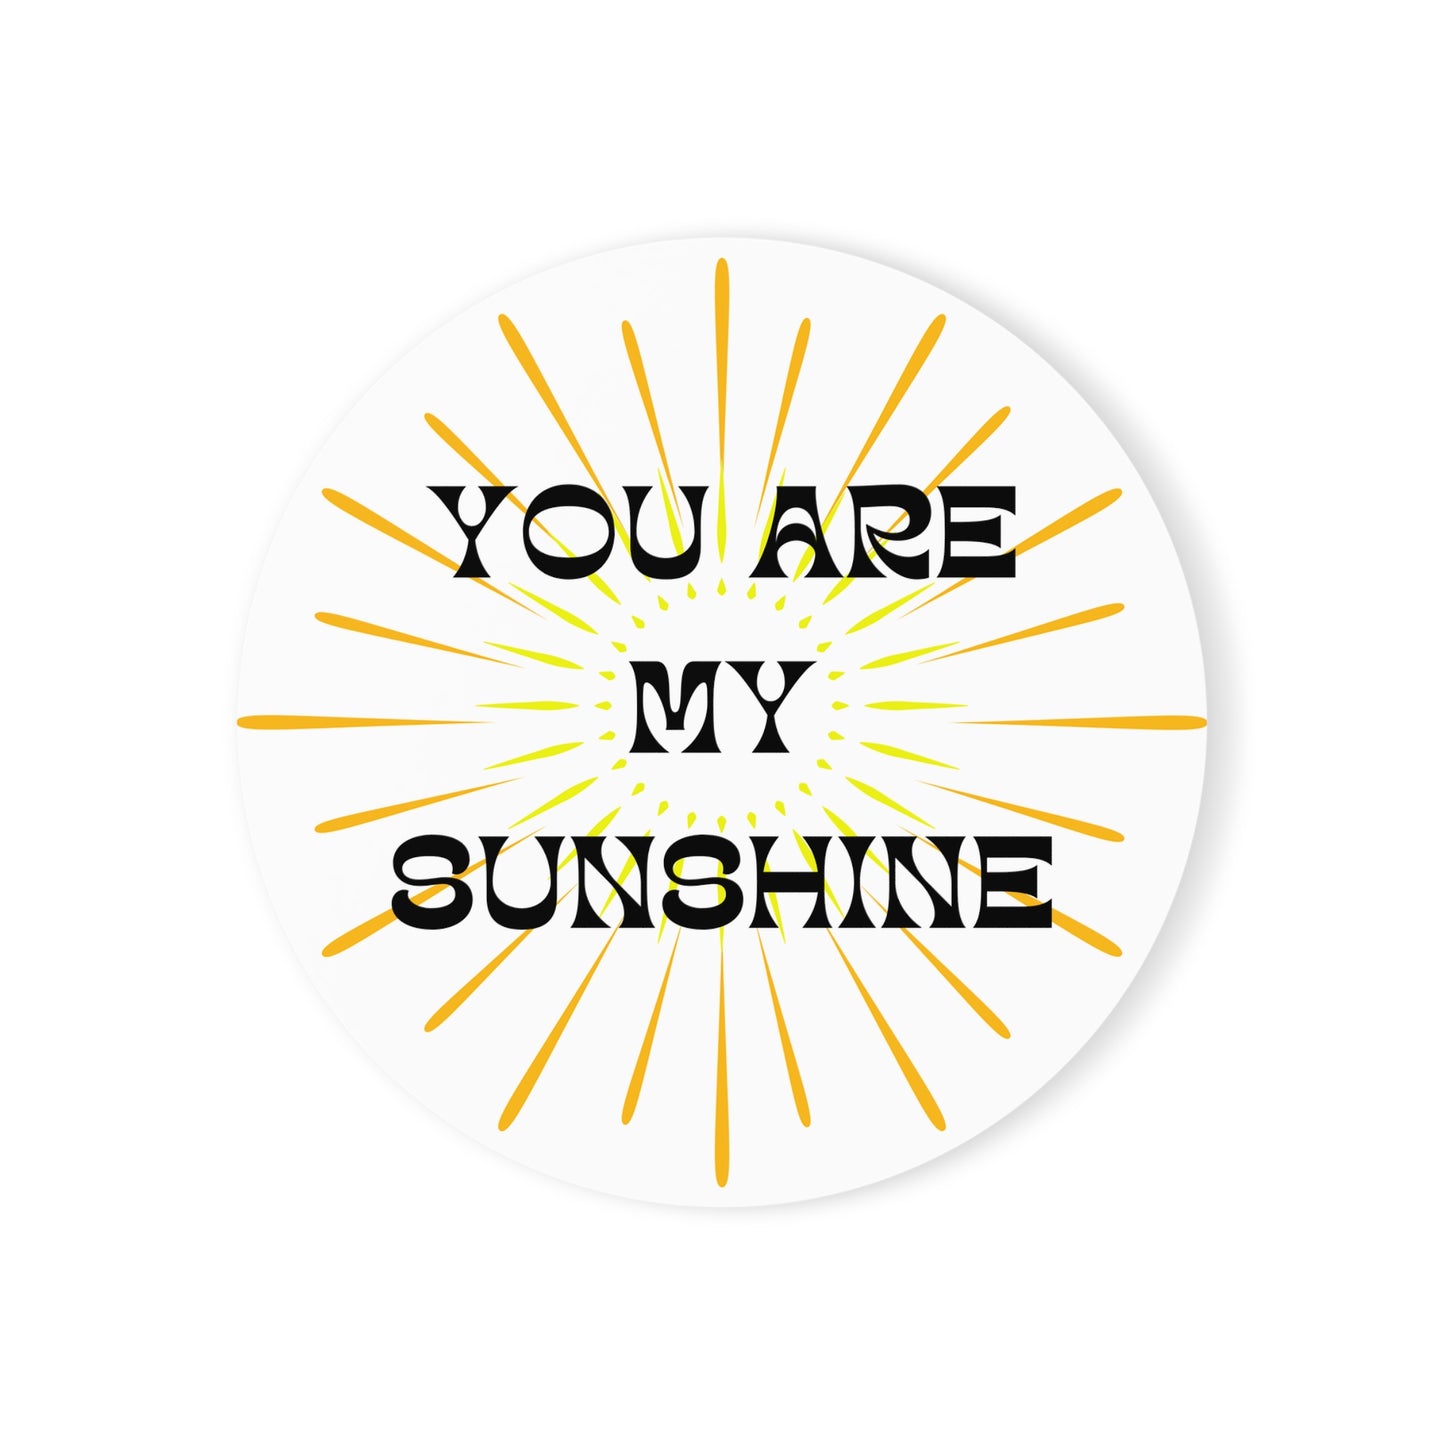 Coaster for Candles, Mugs, Glasses, You Are My Sunshine